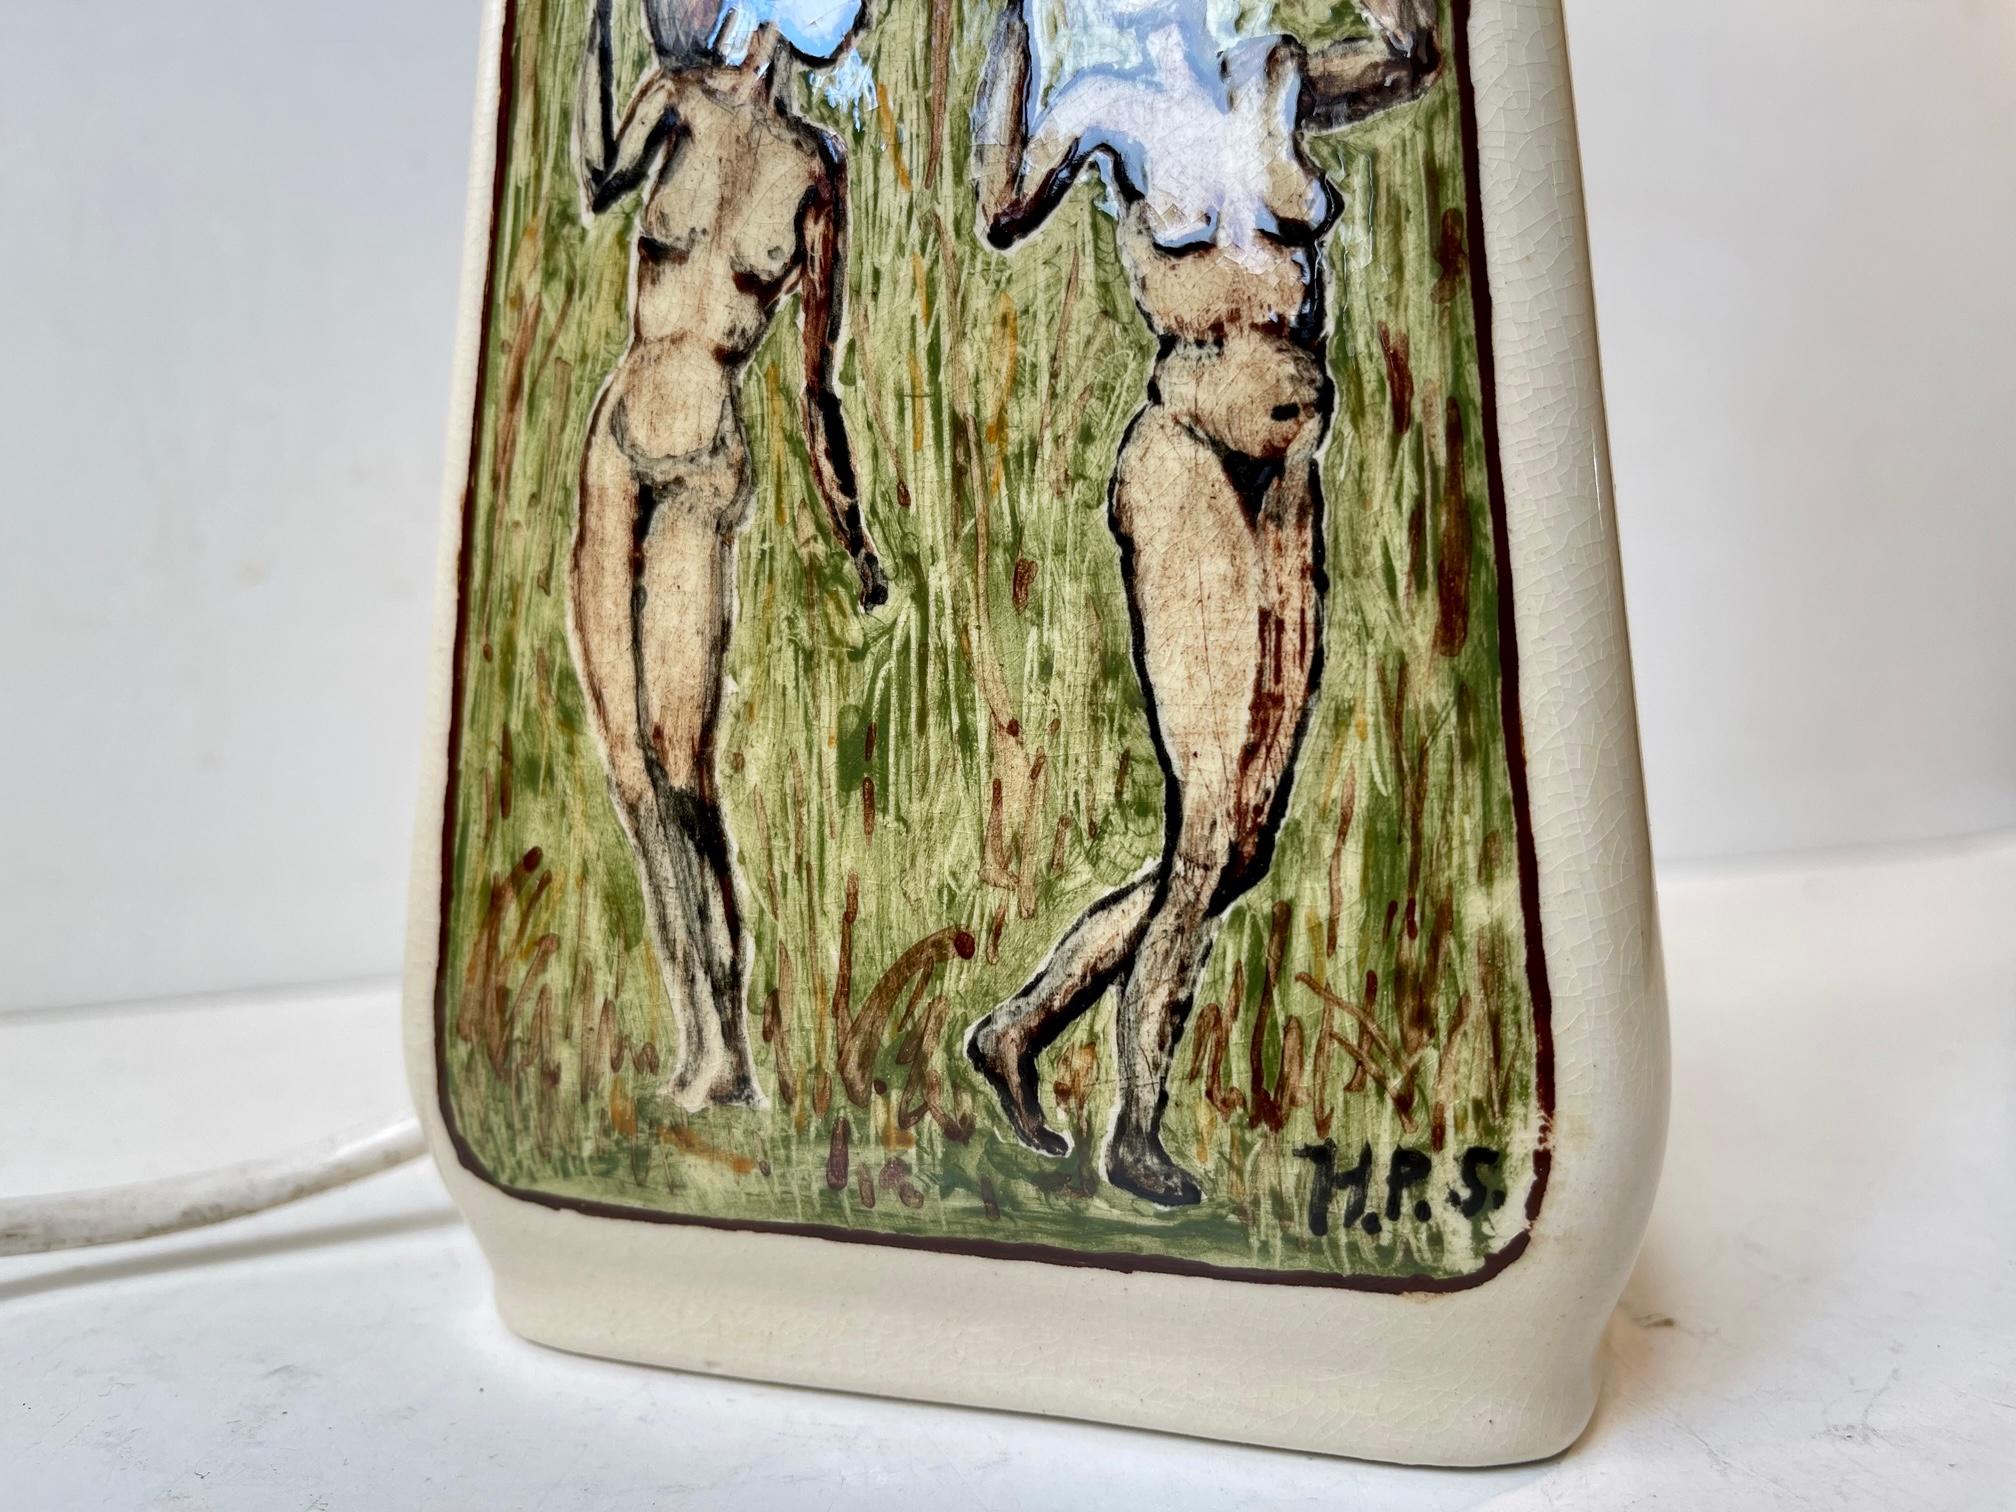 Glazed Hand-painted Ceramic Table Lamp with Naked African Woman, 1970s For Sale